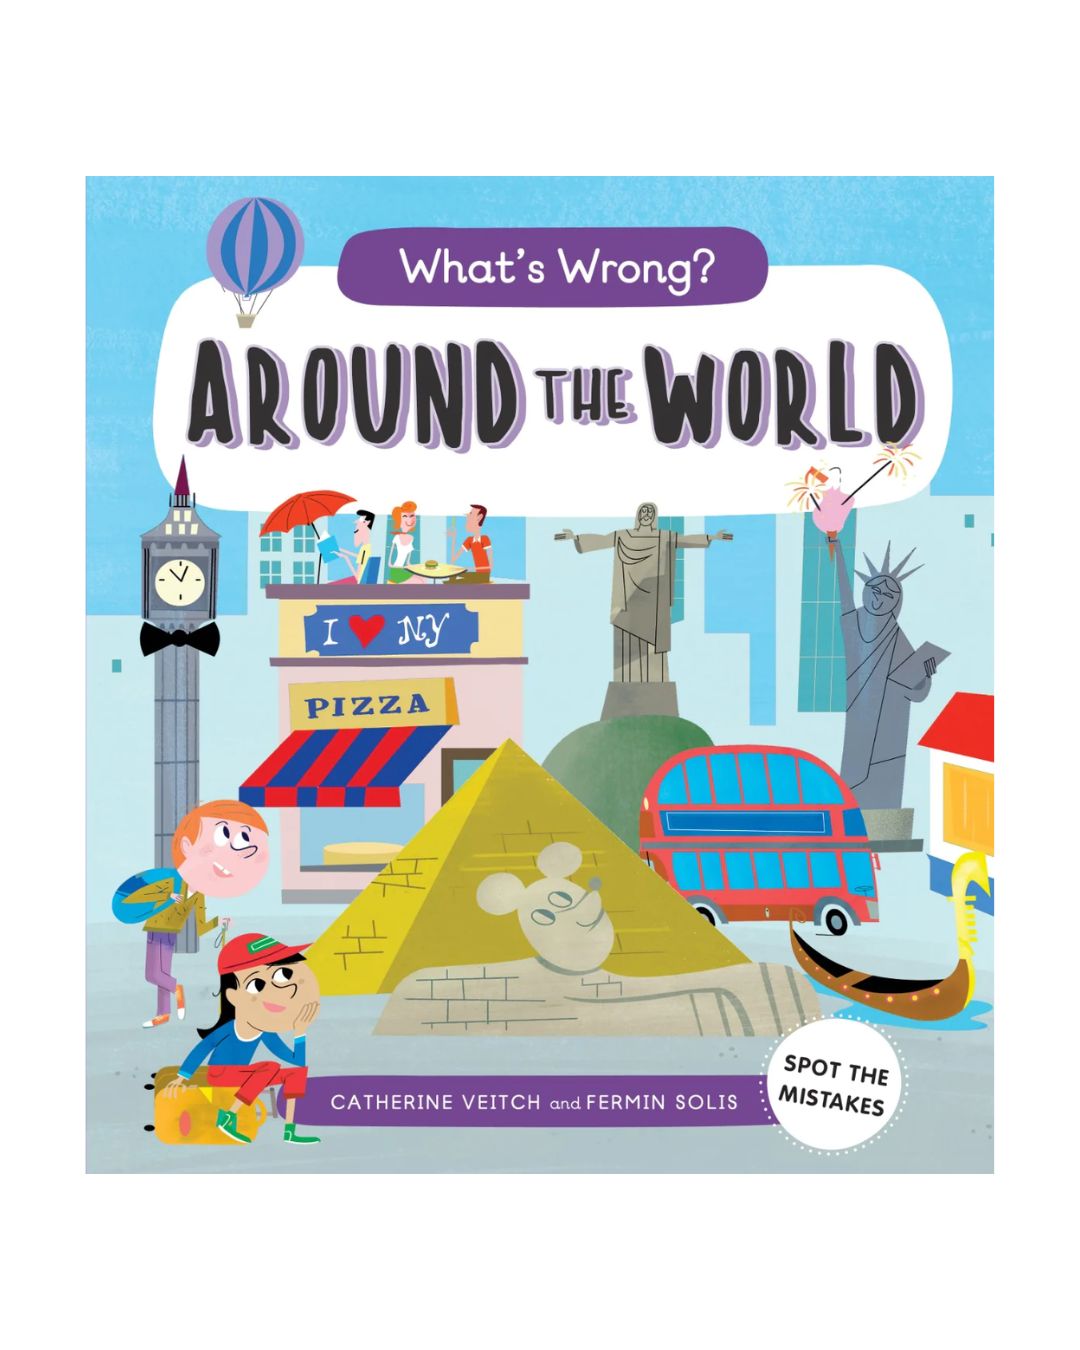 What's Wrong? Around the World by Catherine Veitch - Paper Back - Original